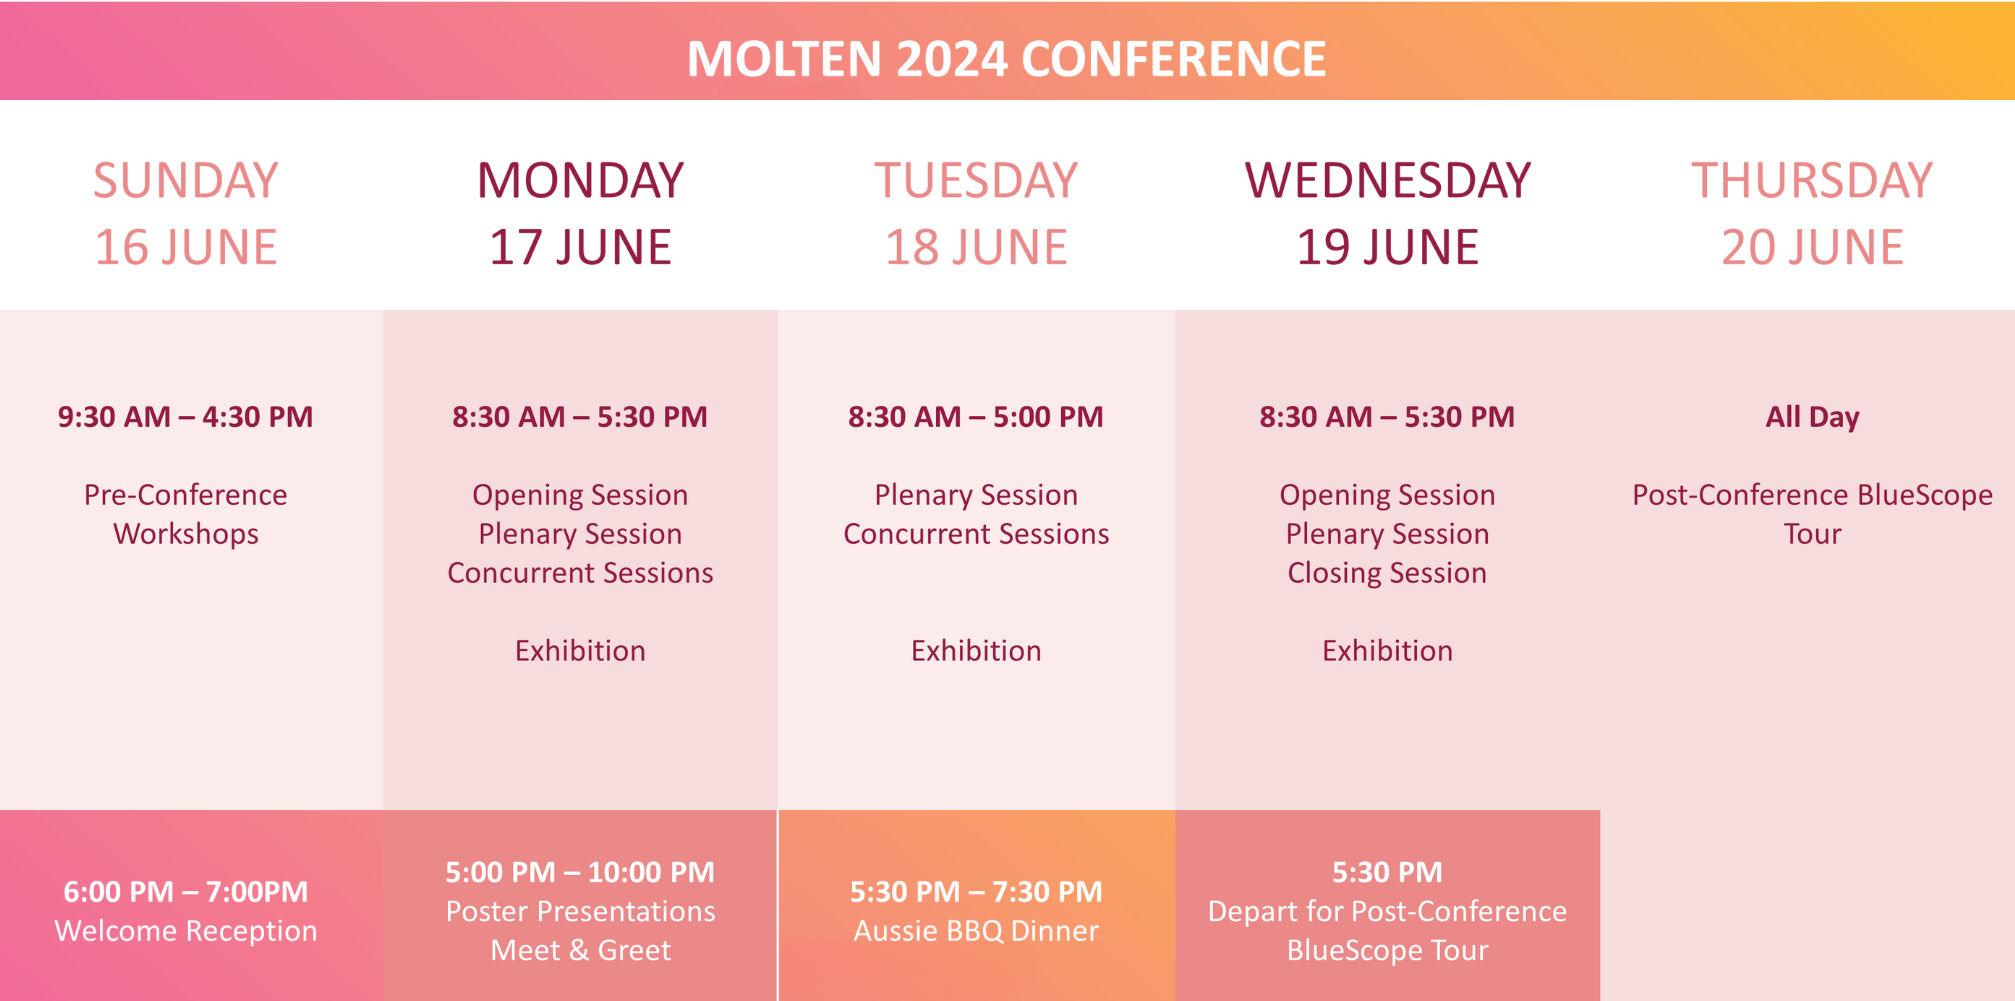 Molten conference schedule at a glance 2024